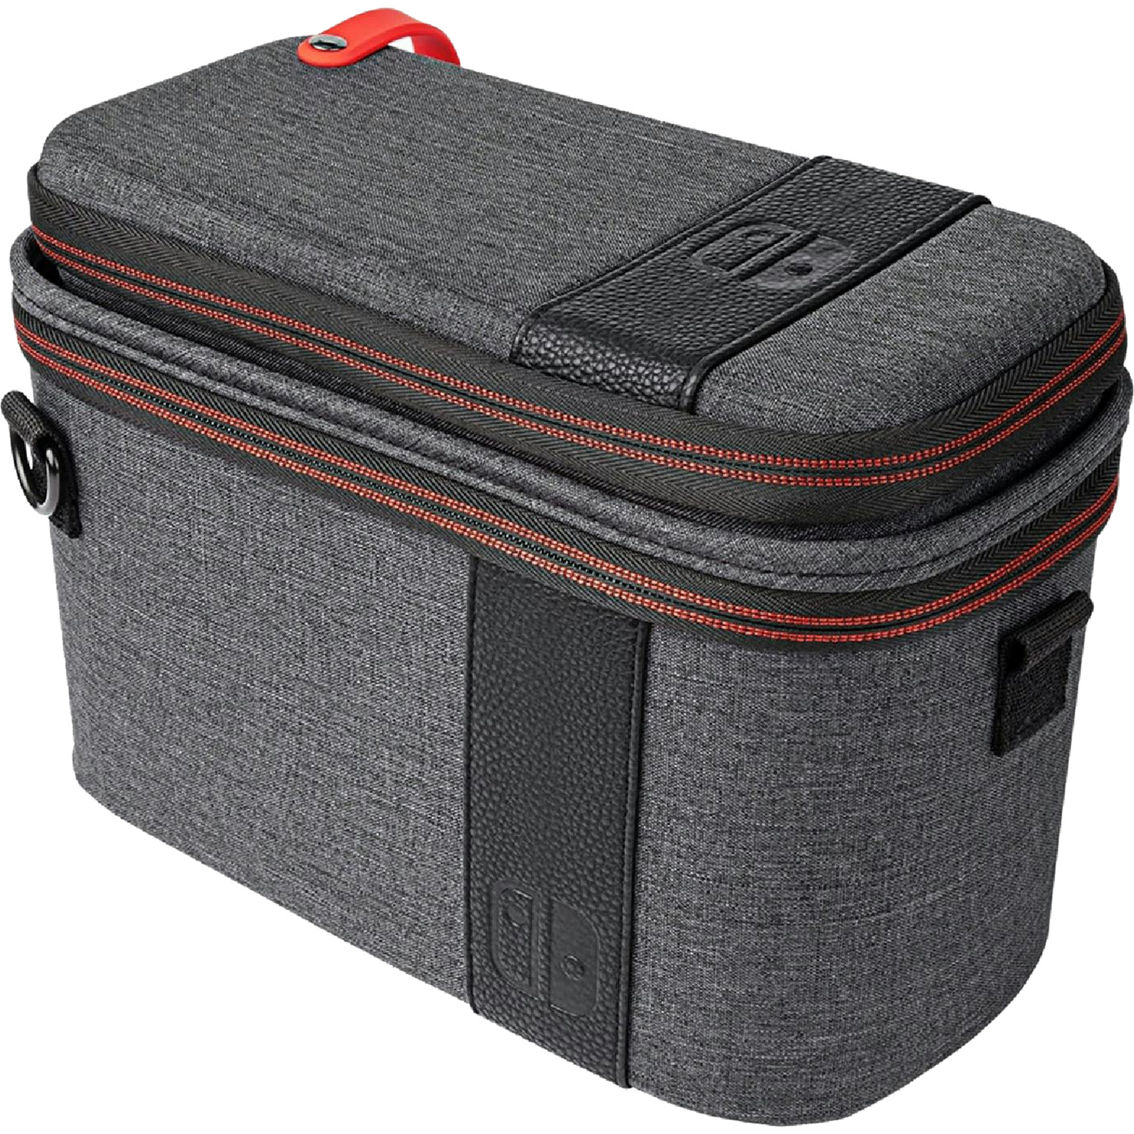 PDP Gaming Pull-N-Go Case: Elite Edition - Nintendo Switch - Image 5 of 9